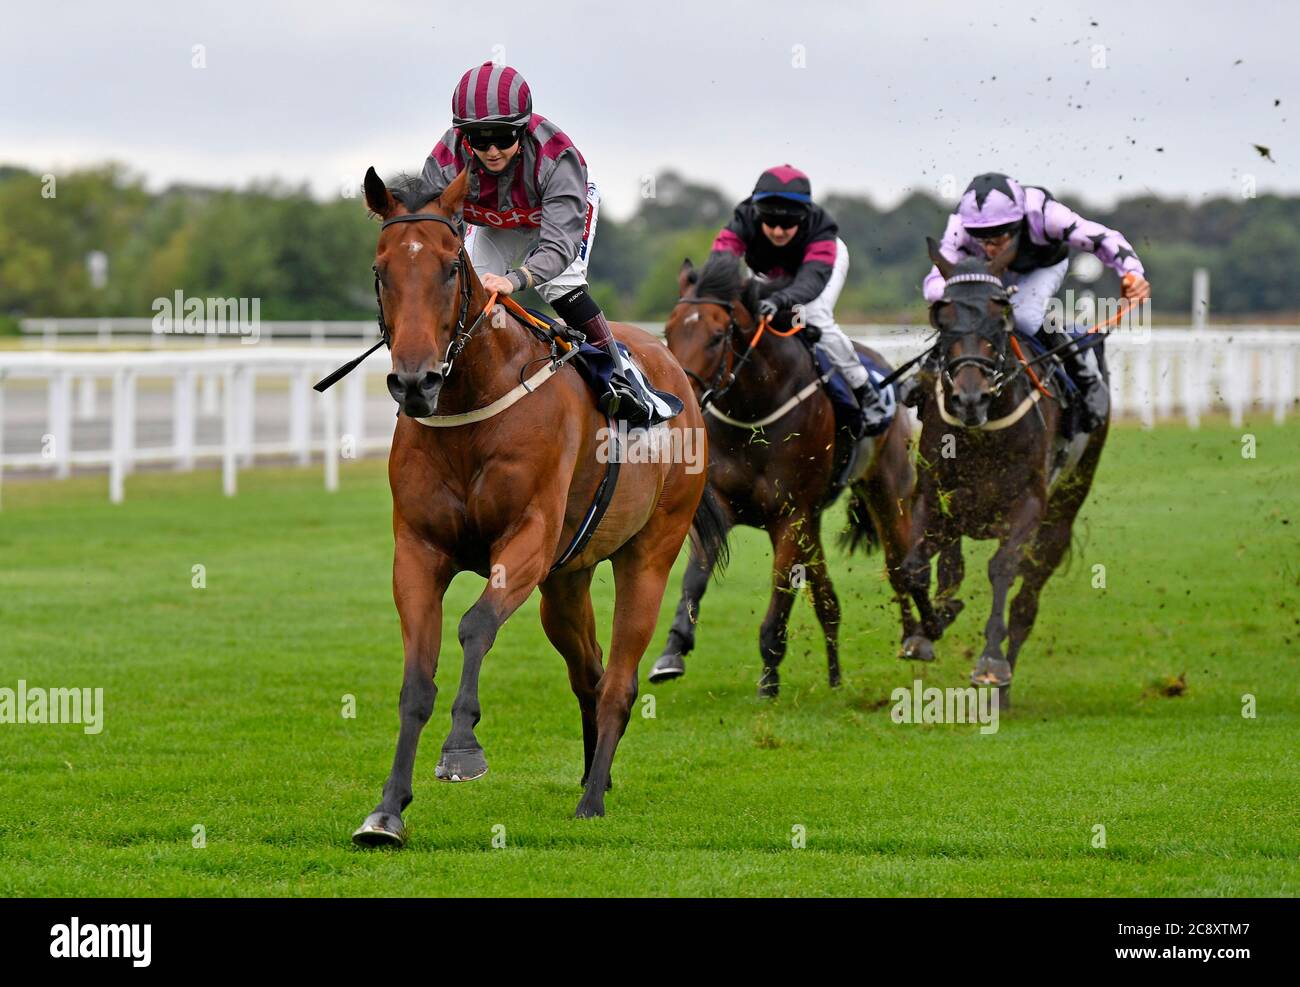 Hollie Doyle on board Pettochside wins the Watch Free Race Replays on attheraces.com Handicap at Royal Windsor Racecourse. Stock Photo